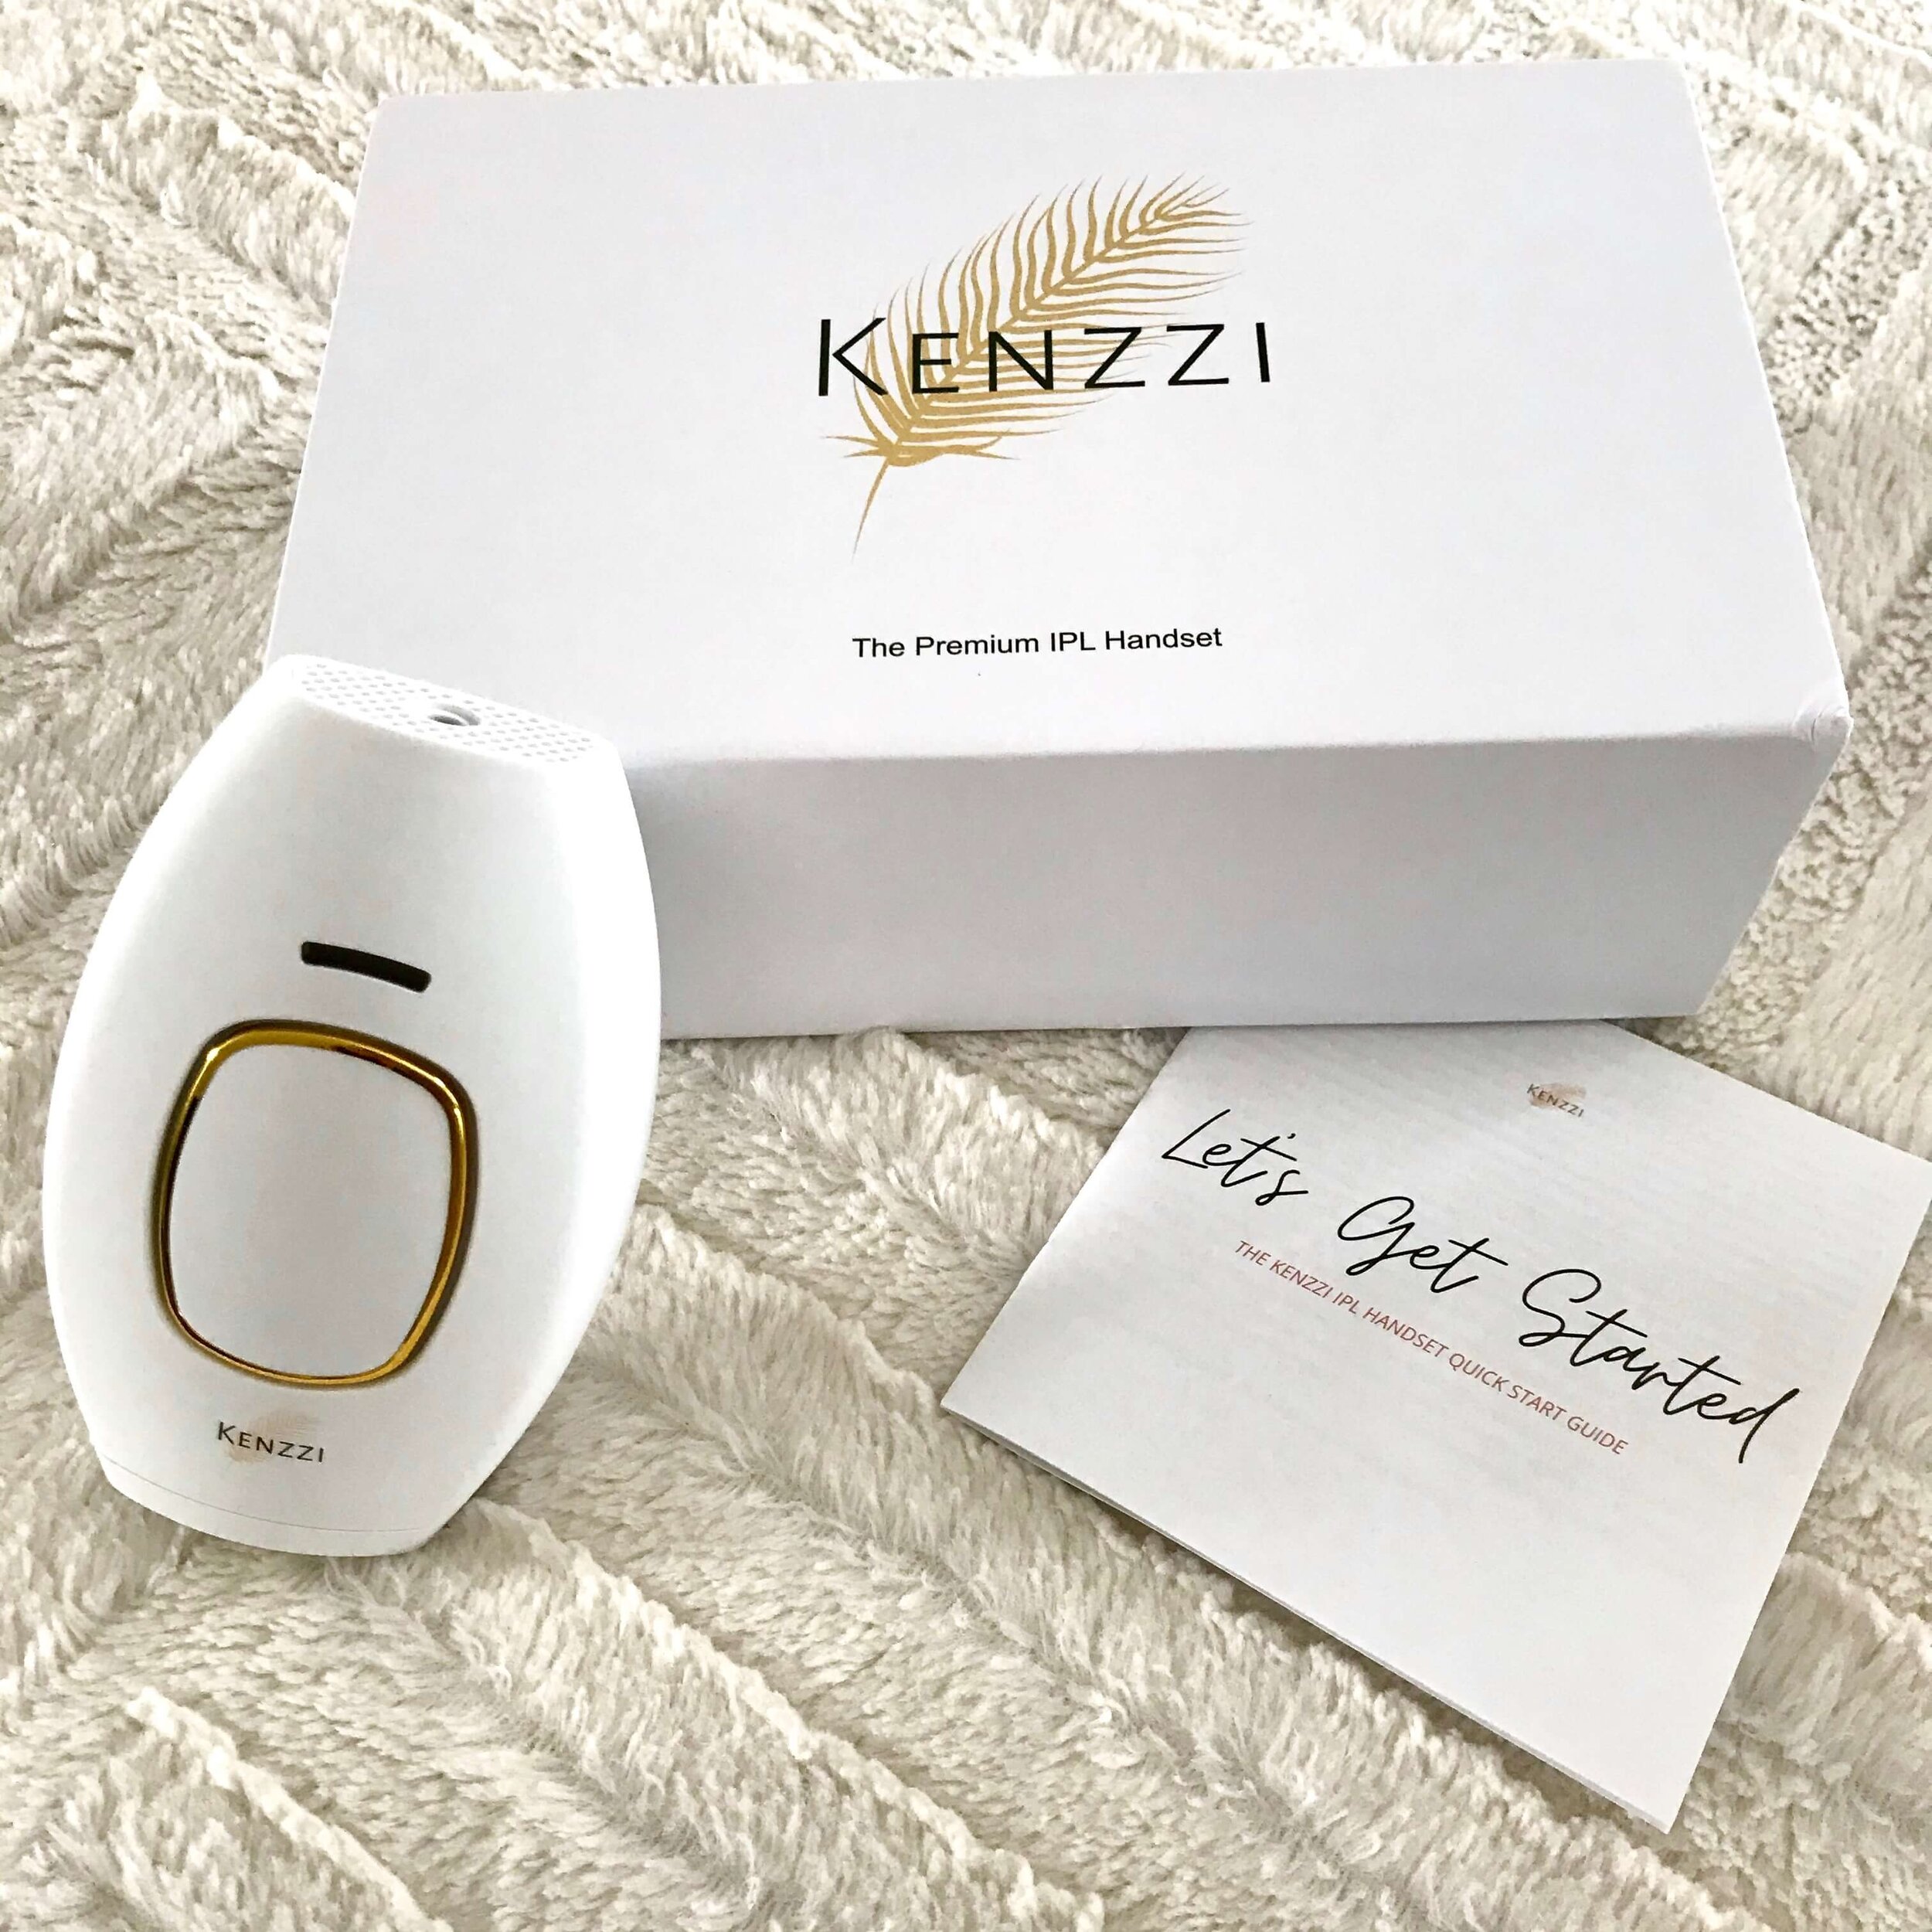 10 Kenzzi Laser Reviews 2023 - Do Not Buy Before Reading This!